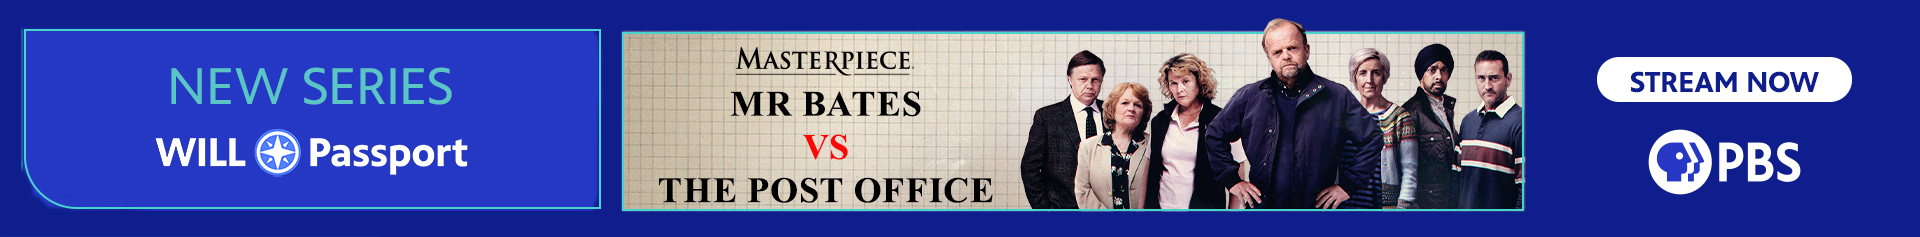 New PBS masterpiece series: Mr Bates VS The Post Office